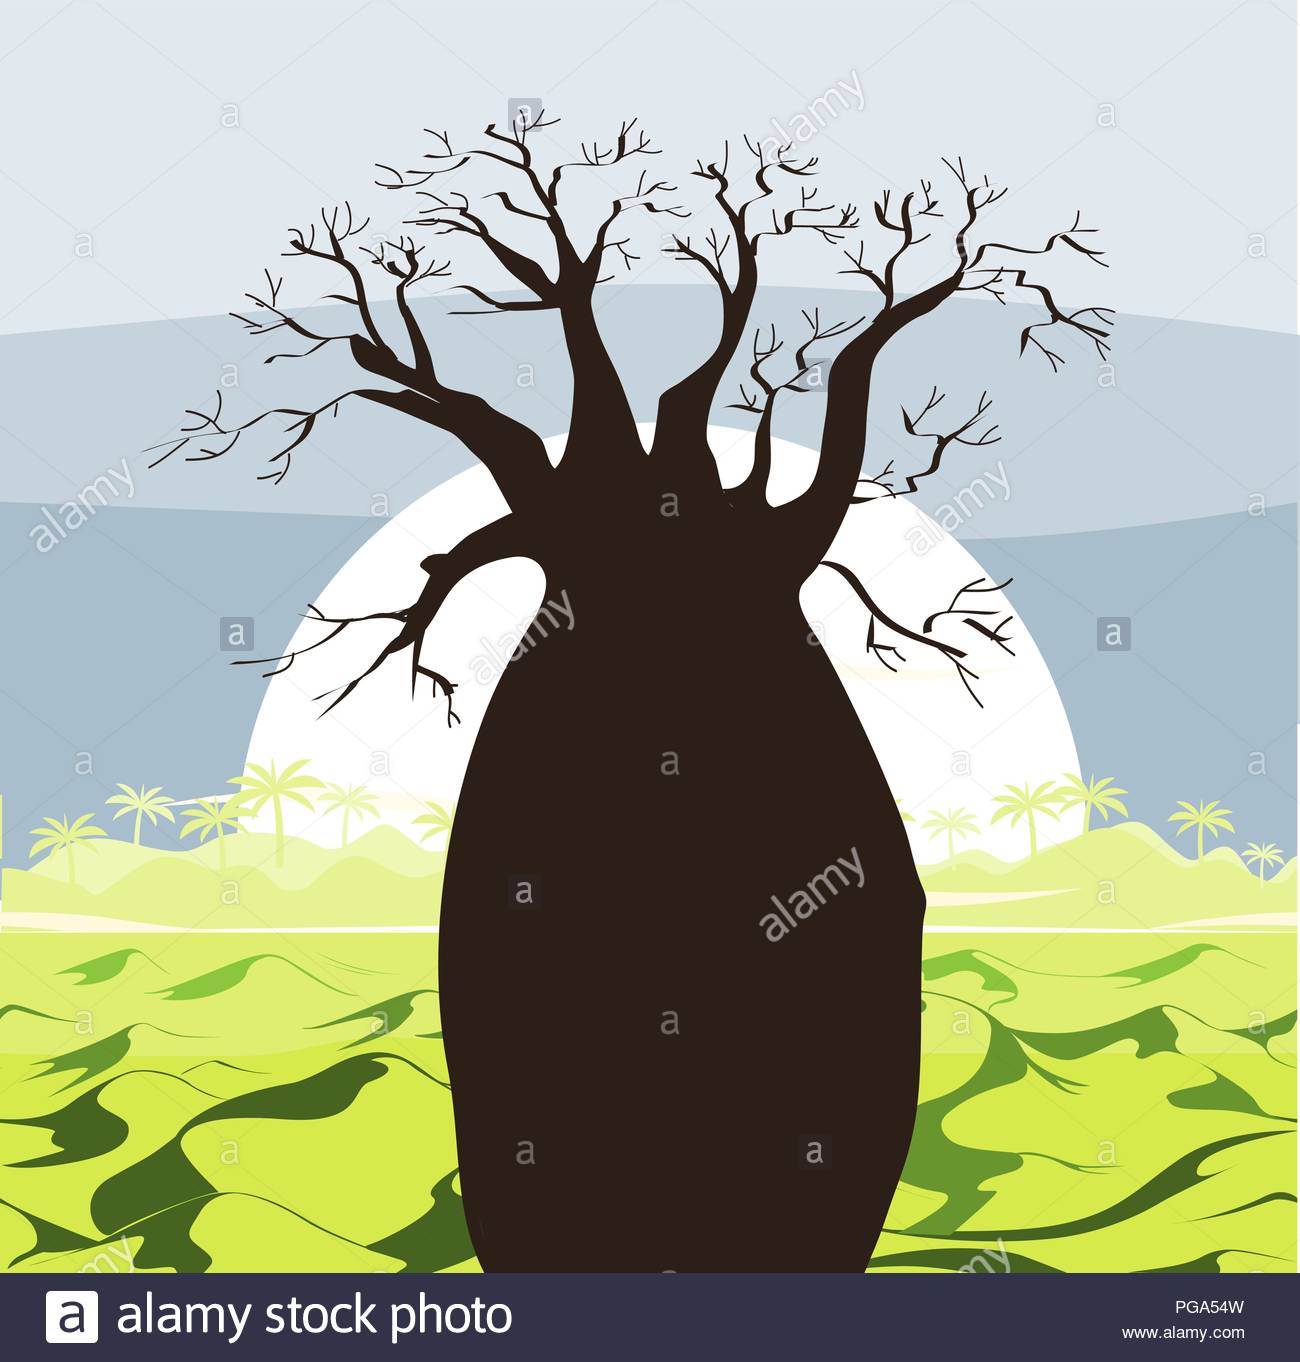 Baobab Tree Landscape With Green Hills And Sun Silhouette